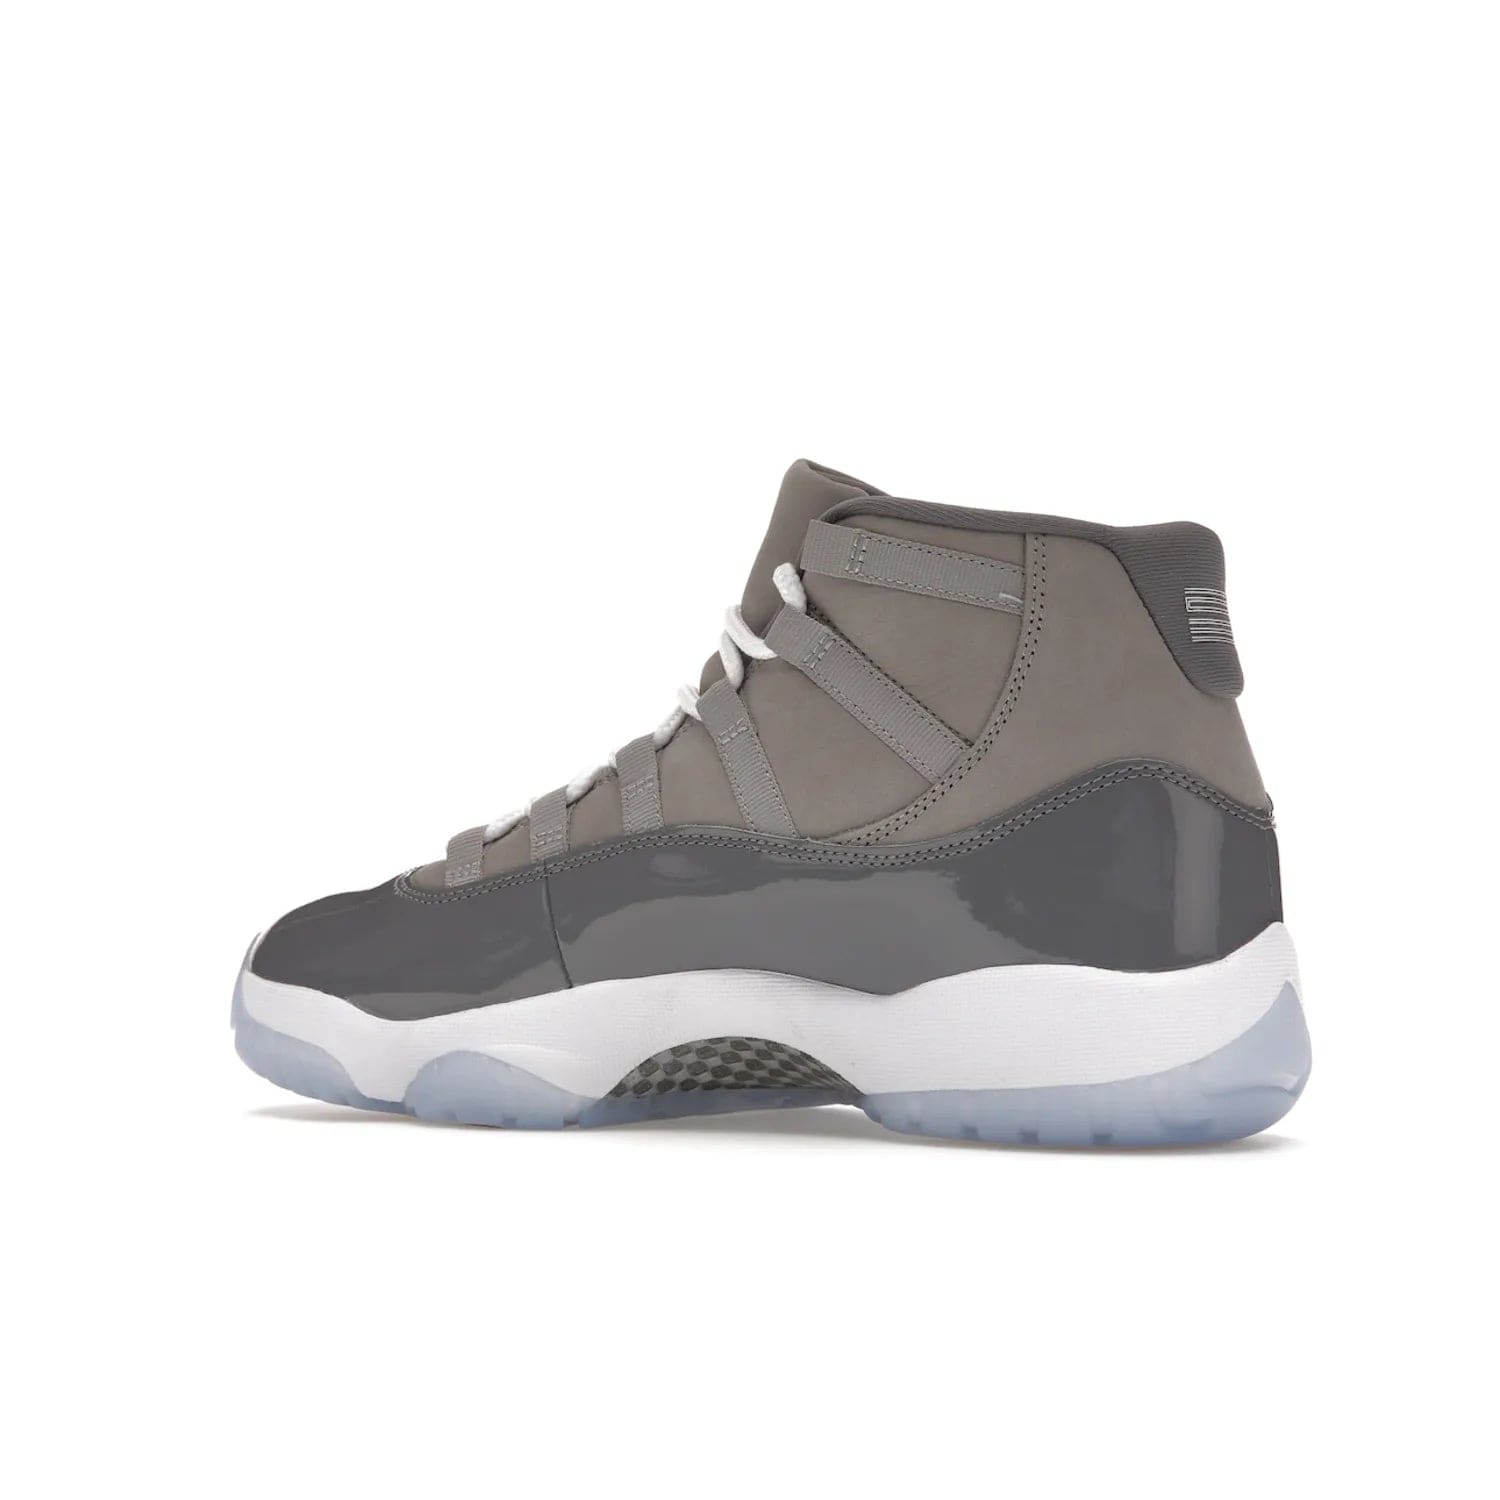 Jordan 11 Retro Cool Grey (2021) - Image 22 - Only at www.BallersClubKickz.com - Shop the Air Jordan 11 Retro Cool Grey (2021) for a must-have sneaker with a Cool Grey Durabuck upper, patent leather overlays, signature Jumpman embroidery, a white midsole, icy blue translucent outsole, and Multi-Color accents.  Released in December 2021 for $225.